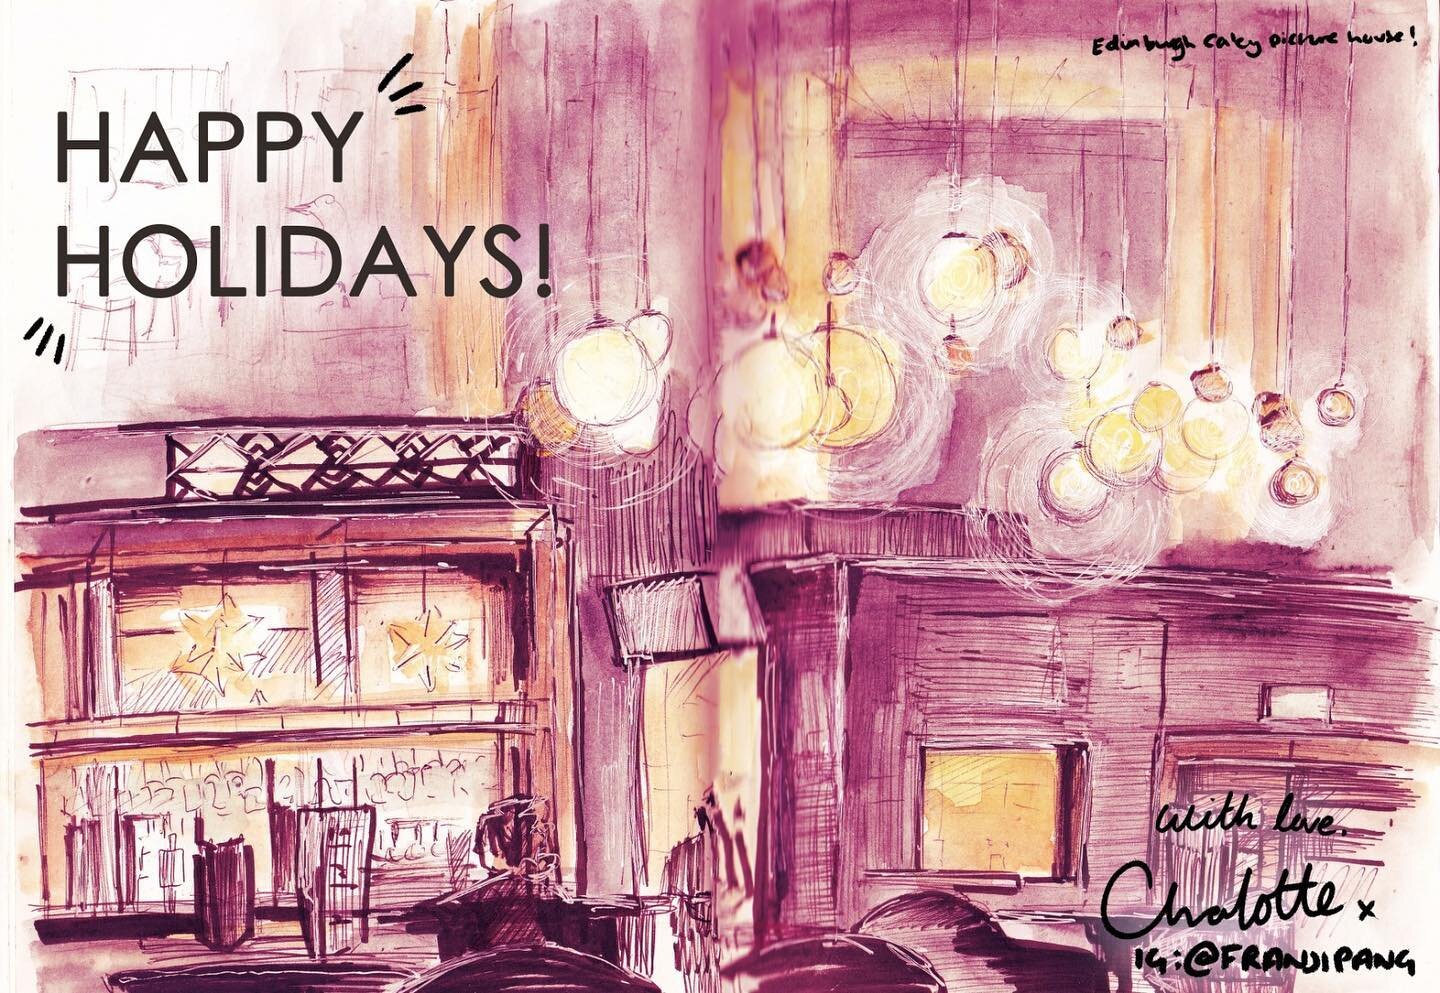 Happy holidays to you all! Take care and hope you have a lovely restful break 💕 
🌻
Repurposing this sketch (again!) at the Caley Picture House pub in Edinburgh. A stunning building!!
-
-
-
-
-
-
#christmas #jdwetherspoons #caleypicturehouse #urbans